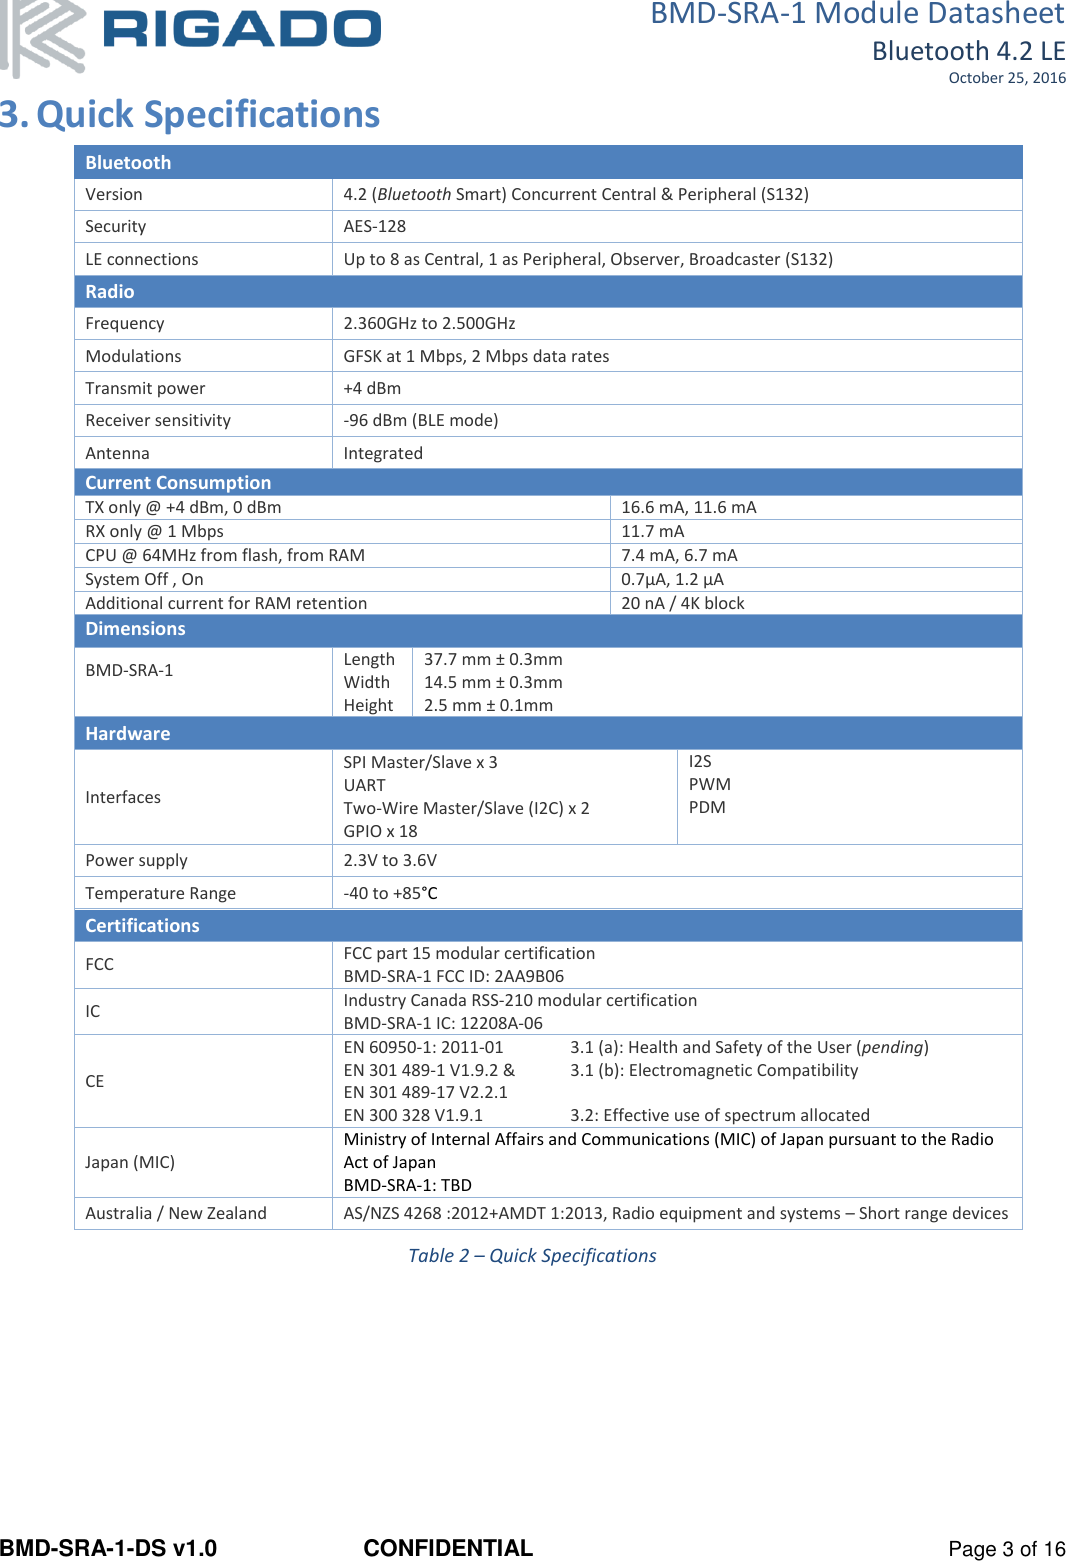 BMD-SRA-1 Module Datasheet Bluetooth 4.2 LE October 25, 2016 BMD-SRA-1-DS v1.0  CONFIDENTIAL  Page 3 of 16 3. Quick Specifications  Bluetooth Version 4.2 (Bluetooth Smart) Concurrent Central &amp; Peripheral (S132) Security AES-128 LE connections Up to 8 as Central, 1 as Peripheral, Observer, Broadcaster (S132) Radio Frequency 2.360GHz to 2.500GHz Modulations GFSK at 1 Mbps, 2 Mbps data rates Transmit power +4 dBm Receiver sensitivity -96 dBm (BLE mode) Antenna  Integrated Current Consumption TX only @ +4 dBm, 0 dBm 16.6 mA, 11.6 mA RX only @ 1 Mbps 11.7 mA CPU @ 64MHz from flash, from RAM 7.4 mA, 6.7 mA System Off , On  0.7µA, 1.2 µA Additional current for RAM retention 20 nA / 4K block Dimensions BMD-SRA-1  Length Width Height 37.7 mm ± 0.3mm 14.5 mm ± 0.3mm 2.5 mm ± 0.1mm Hardware Interfaces SPI Master/Slave x 3 UART Two-Wire Master/Slave (I2C) x 2 GPIO x 18 I2S PWM PDM  Power supply 2.3V to 3.6V Temperature Range -40 to +85°C Certifications FCC FCC part 15 modular certification BMD-SRA-1 FCC ID: 2AA9B06 IC Industry Canada RSS-210 modular certification BMD-SRA-1 IC: 12208A-06 CE EN 60950-1: 2011-01  3.1 (a): Health and Safety of the User (pending) EN 301 489-1 V1.9.2 &amp;  3.1 (b): Electromagnetic Compatibility EN 301 489-17 V2.2.1   EN 300 328 V1.9.1  3.2: Effective use of spectrum allocated Japan (MIC) Ministry of Internal Affairs and Communications (MIC) of Japan pursuant to the Radio Act of Japan BMD-SRA-1: TBD Australia / New Zealand AS/NZS 4268 :2012+AMDT 1:2013, Radio equipment and systems – Short range devices Table 2 – Quick Specifications    